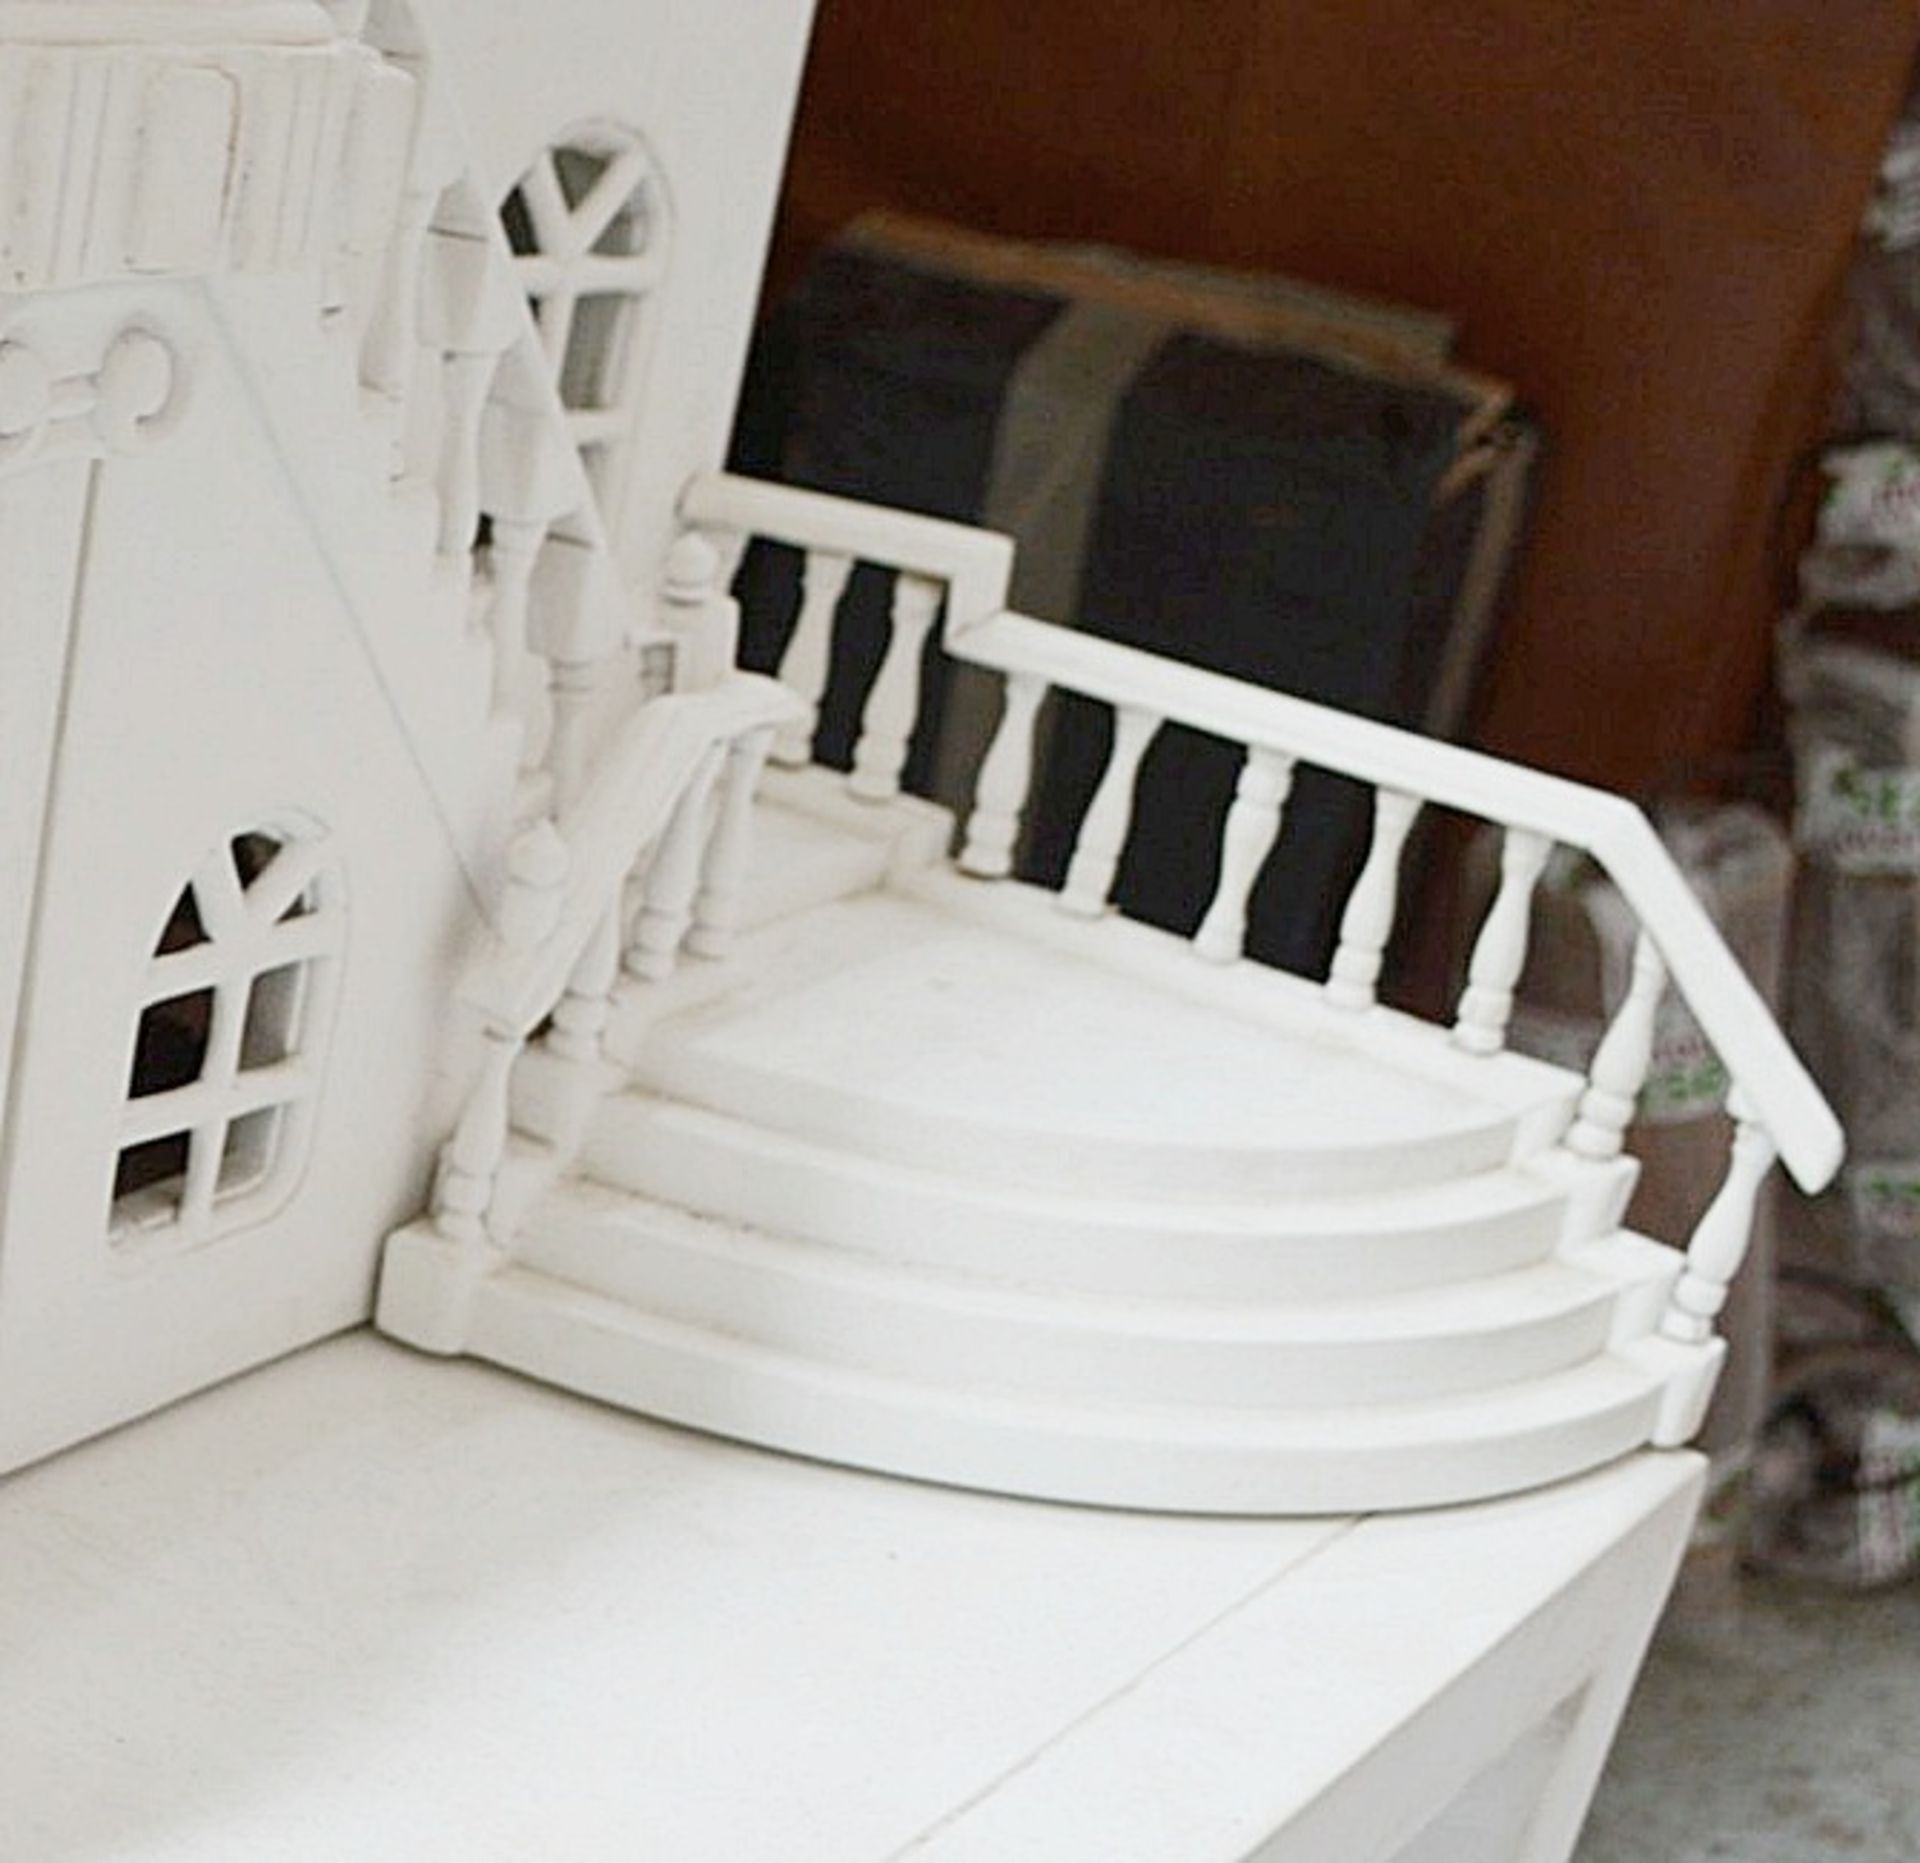 1 x Impressive Bespoke Hand Crafted Wooden Dolls House In White - Image 18 of 19